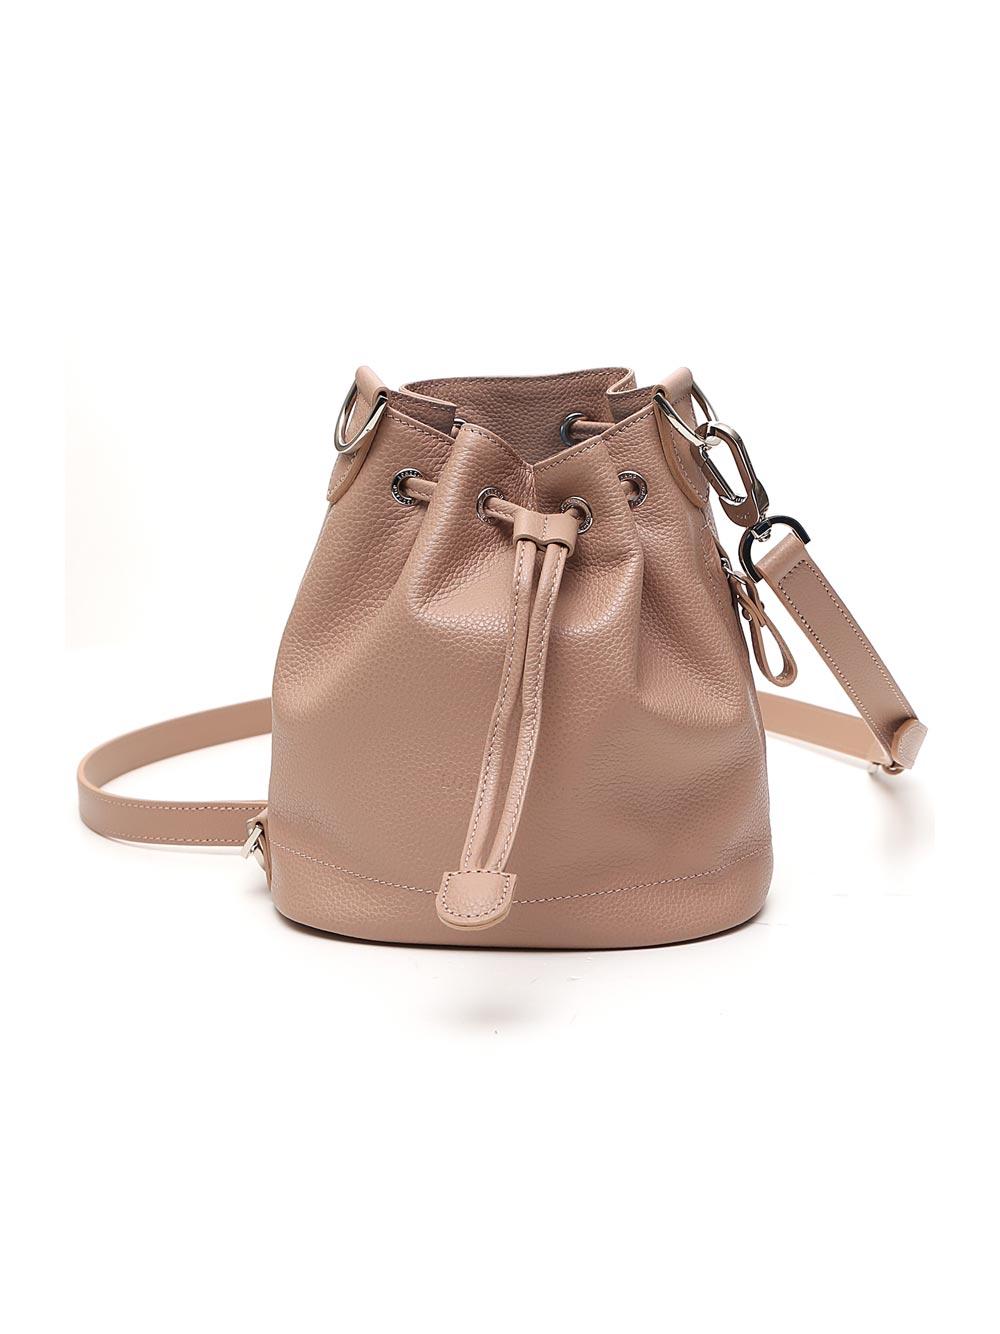 Longchamp Le Foulonné Small Bucket Bag in Natural | Lyst